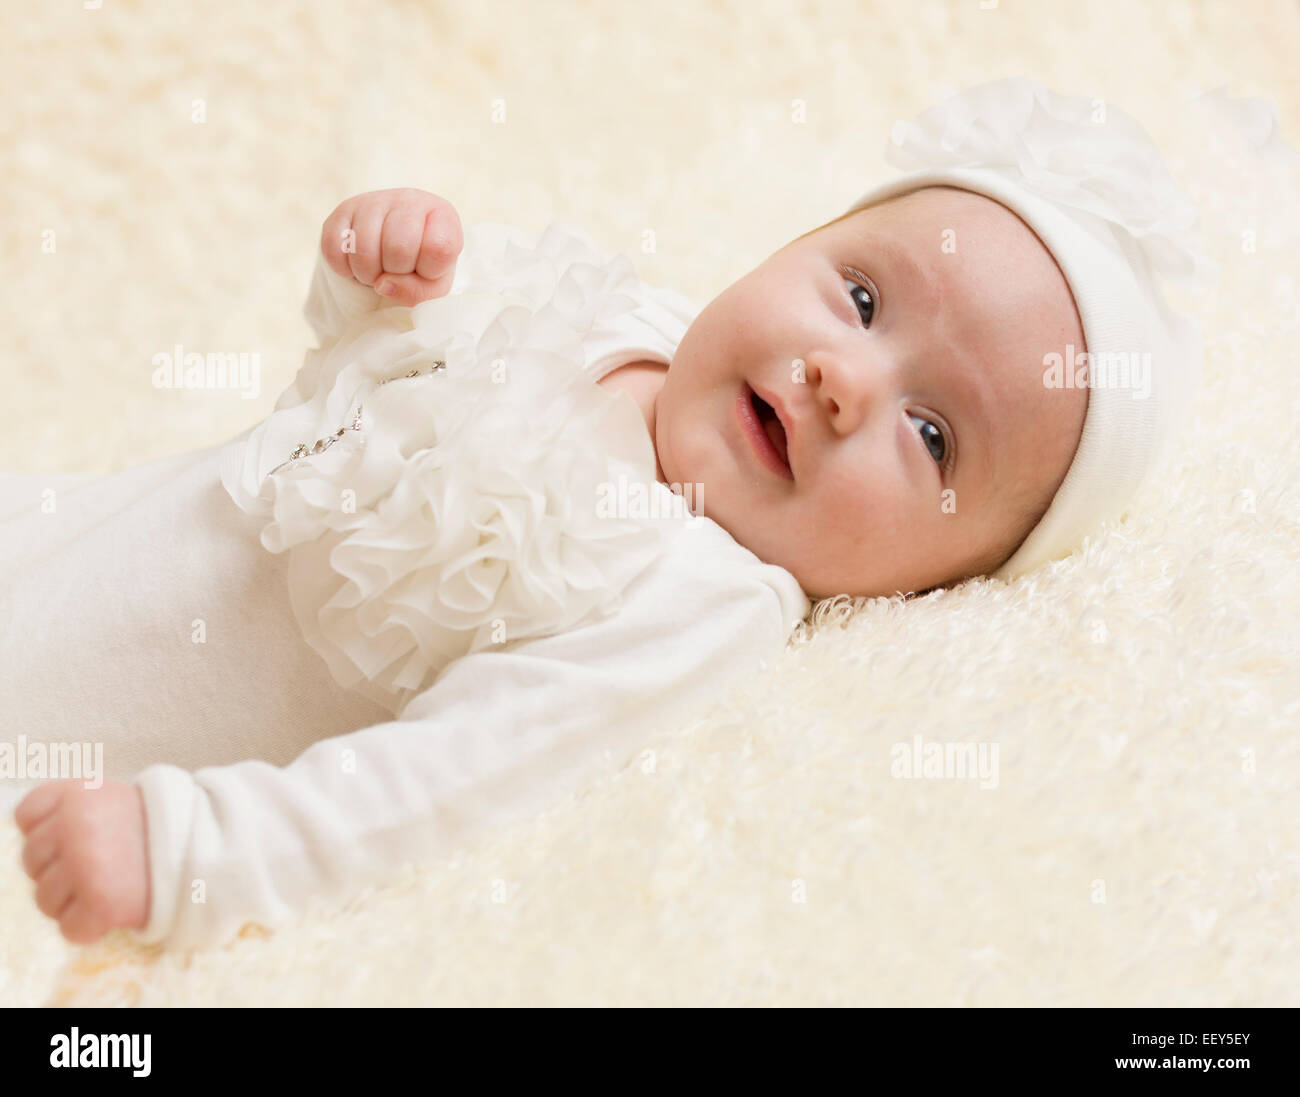 Three month old baby girl smiling and looking towards camera Stock Photo